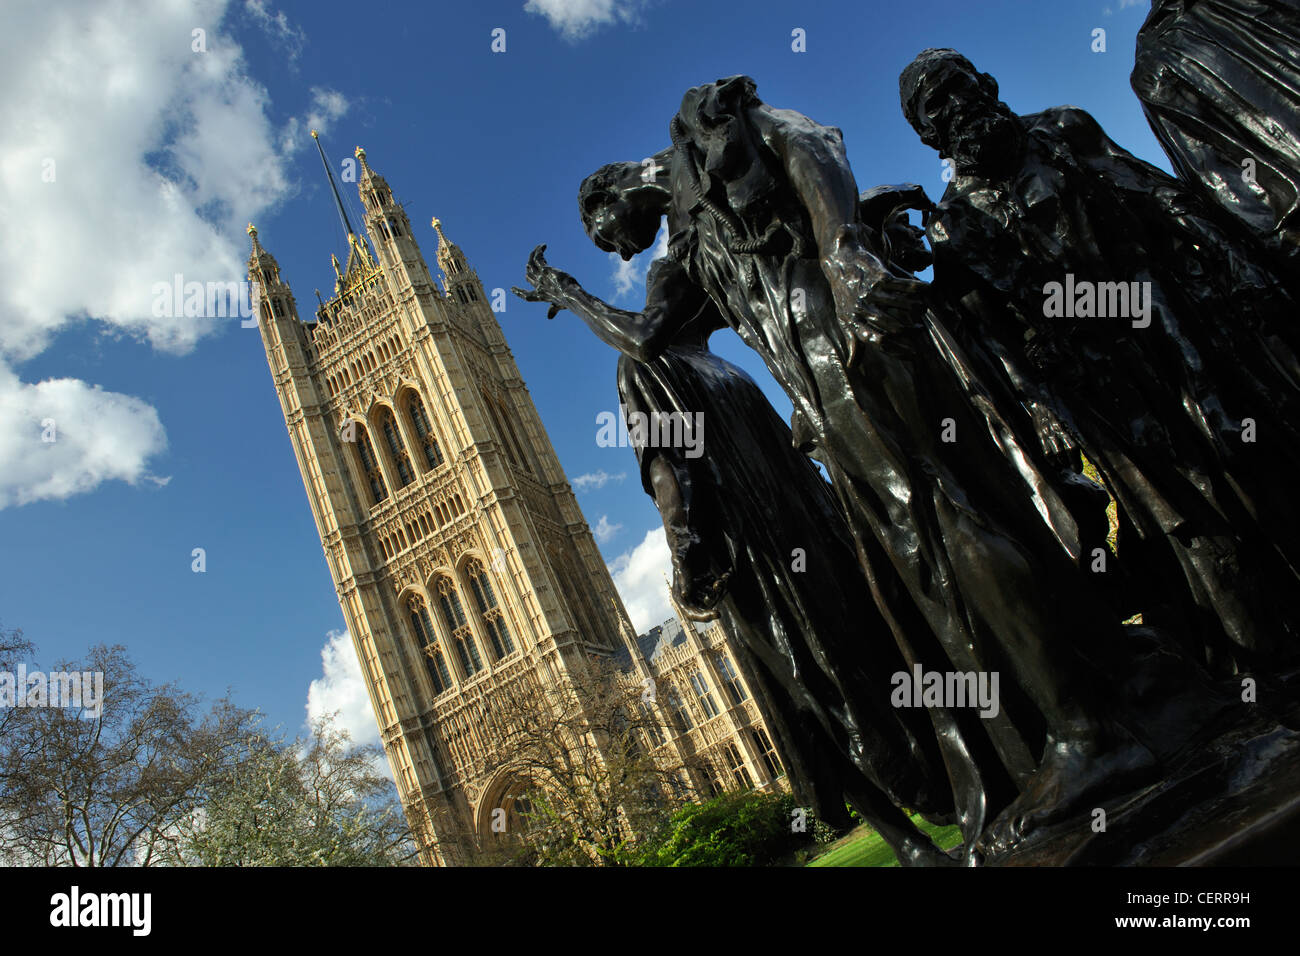 The Burghers of Calais sculpture by Rodin in The Victoria Tower Gardens. Stock Photo